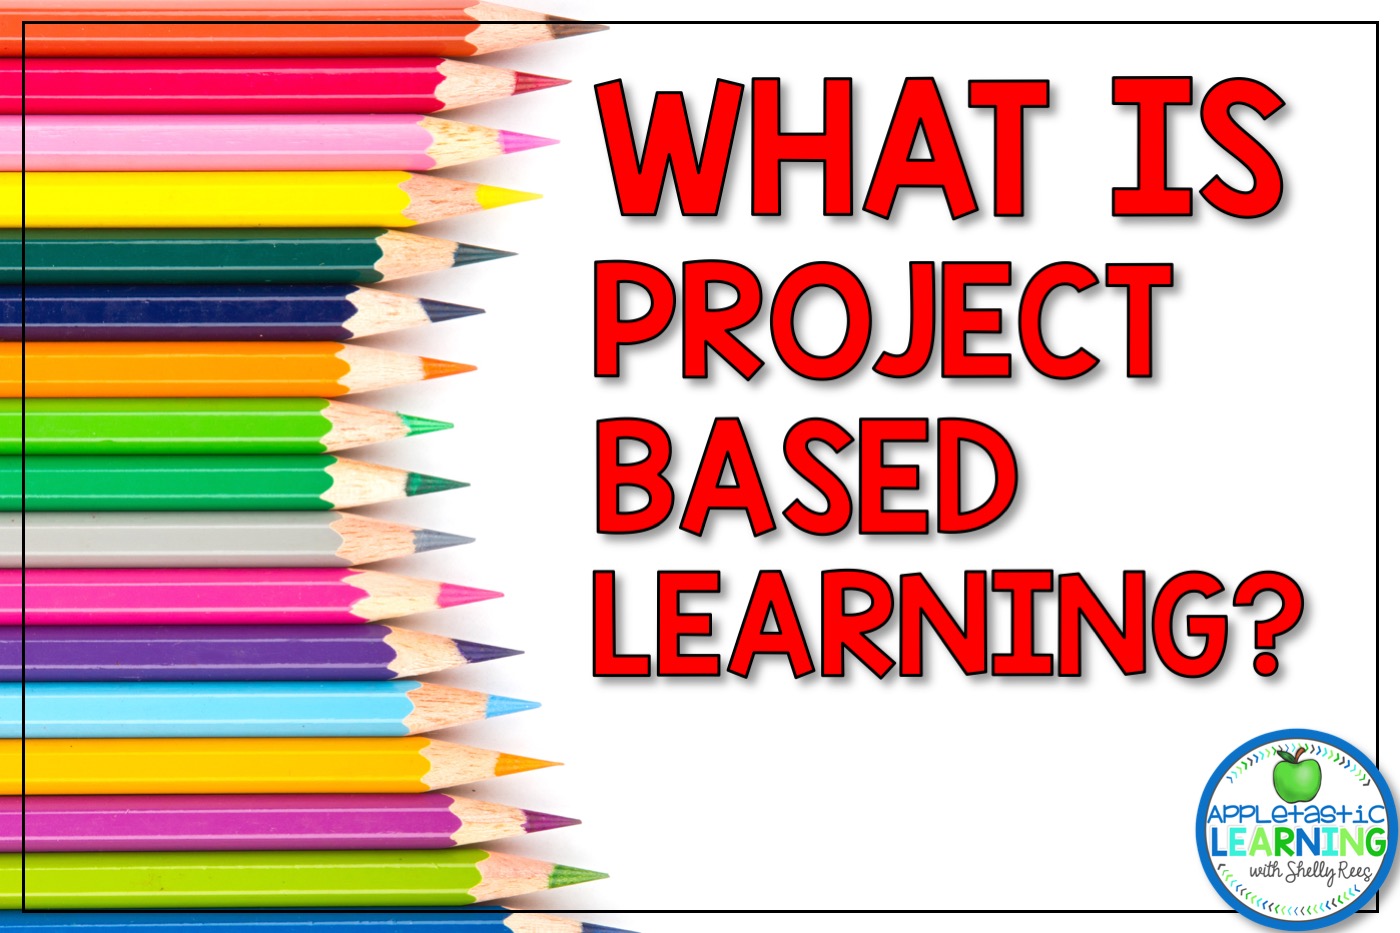 define project learning in education